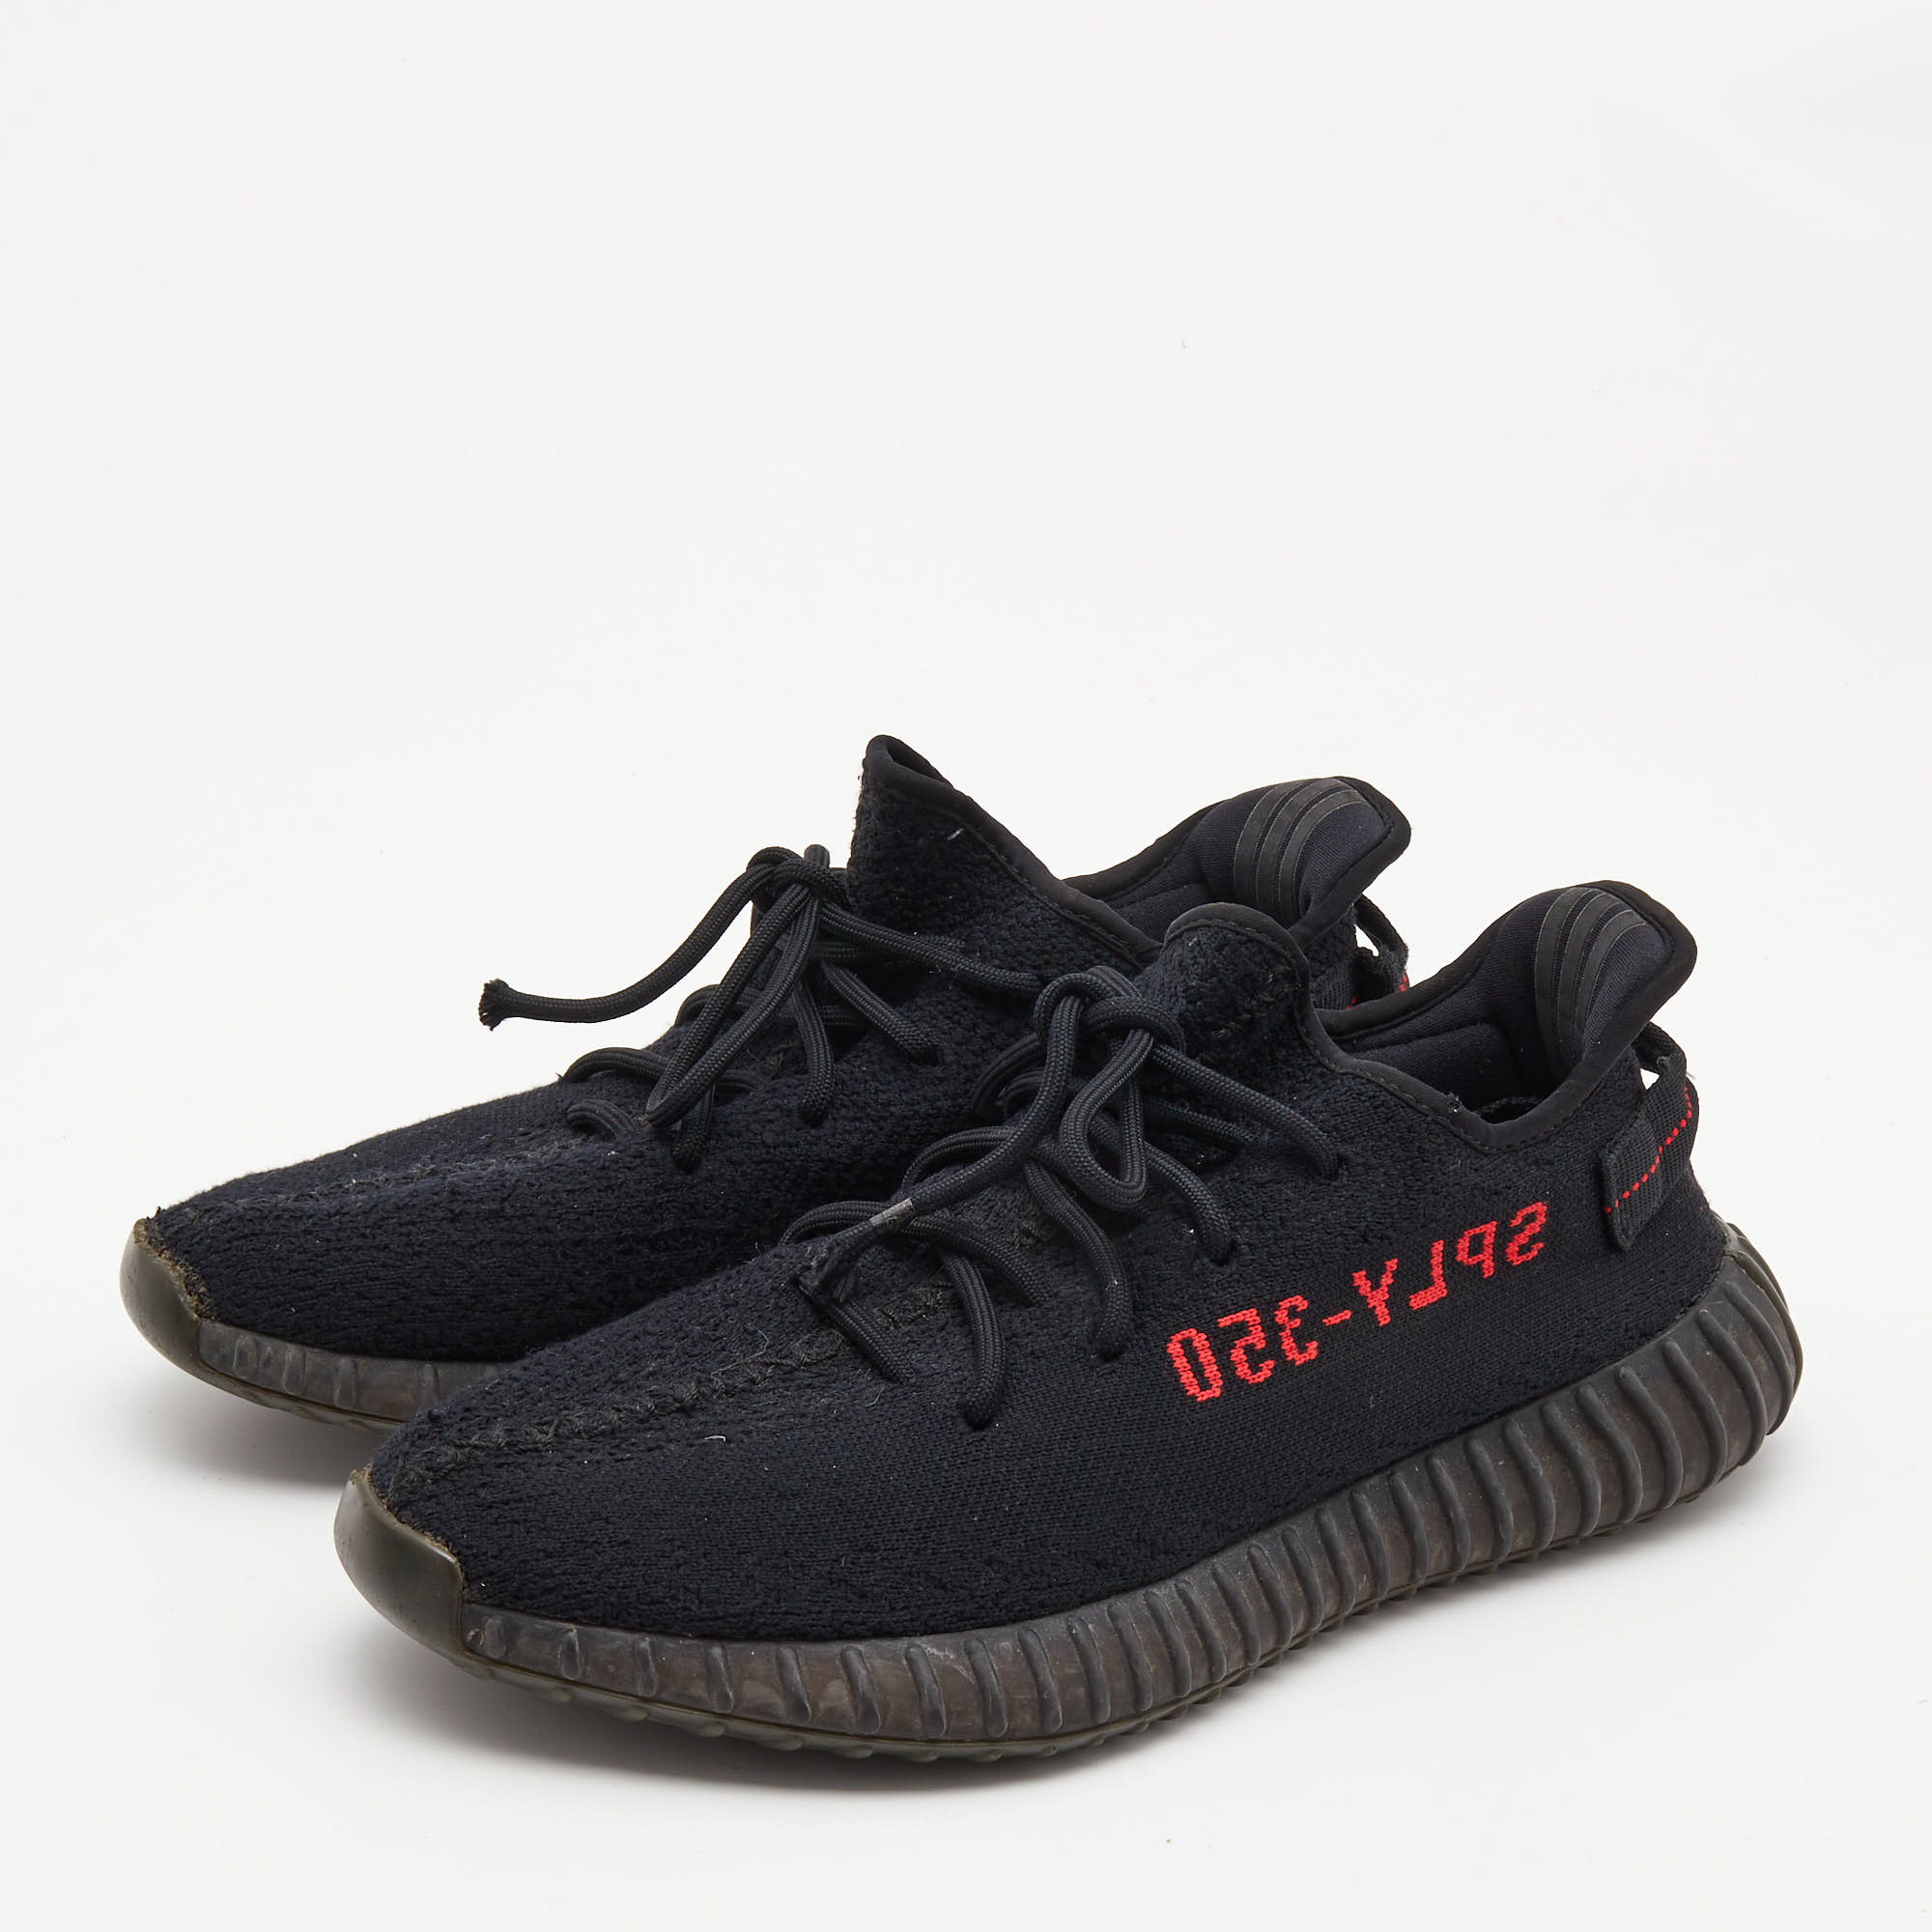 

Yeezy x Adidas Black Knit Fabric Boost 350 V2 Bred Sneakers Size  1/3